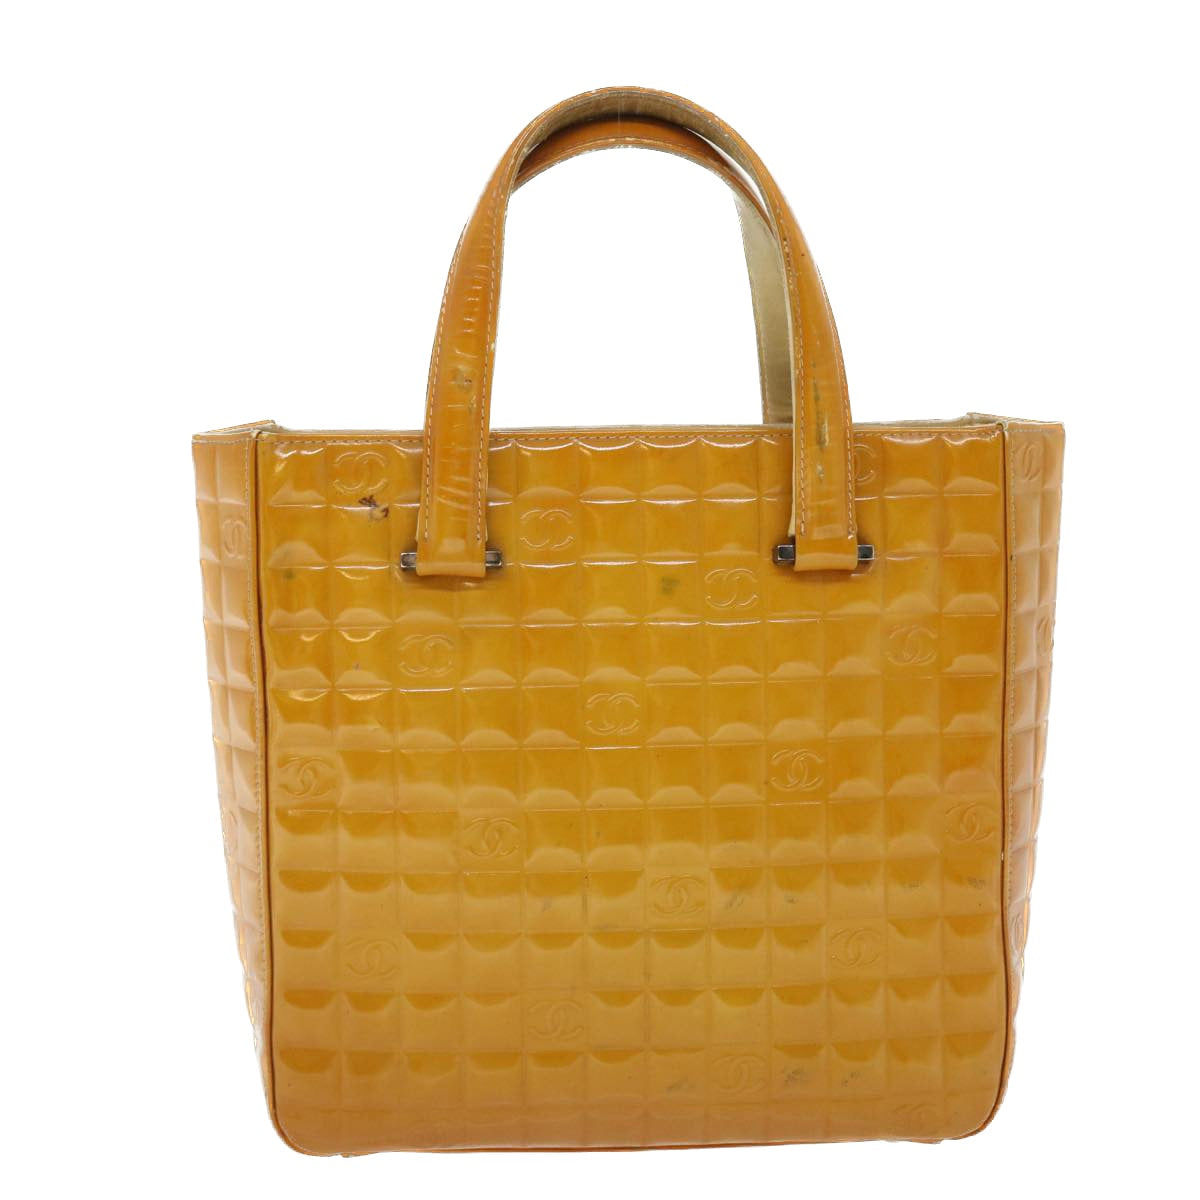 CHANEL Hand Bag Patent leather Yellow CC Auth bs7609 - 0